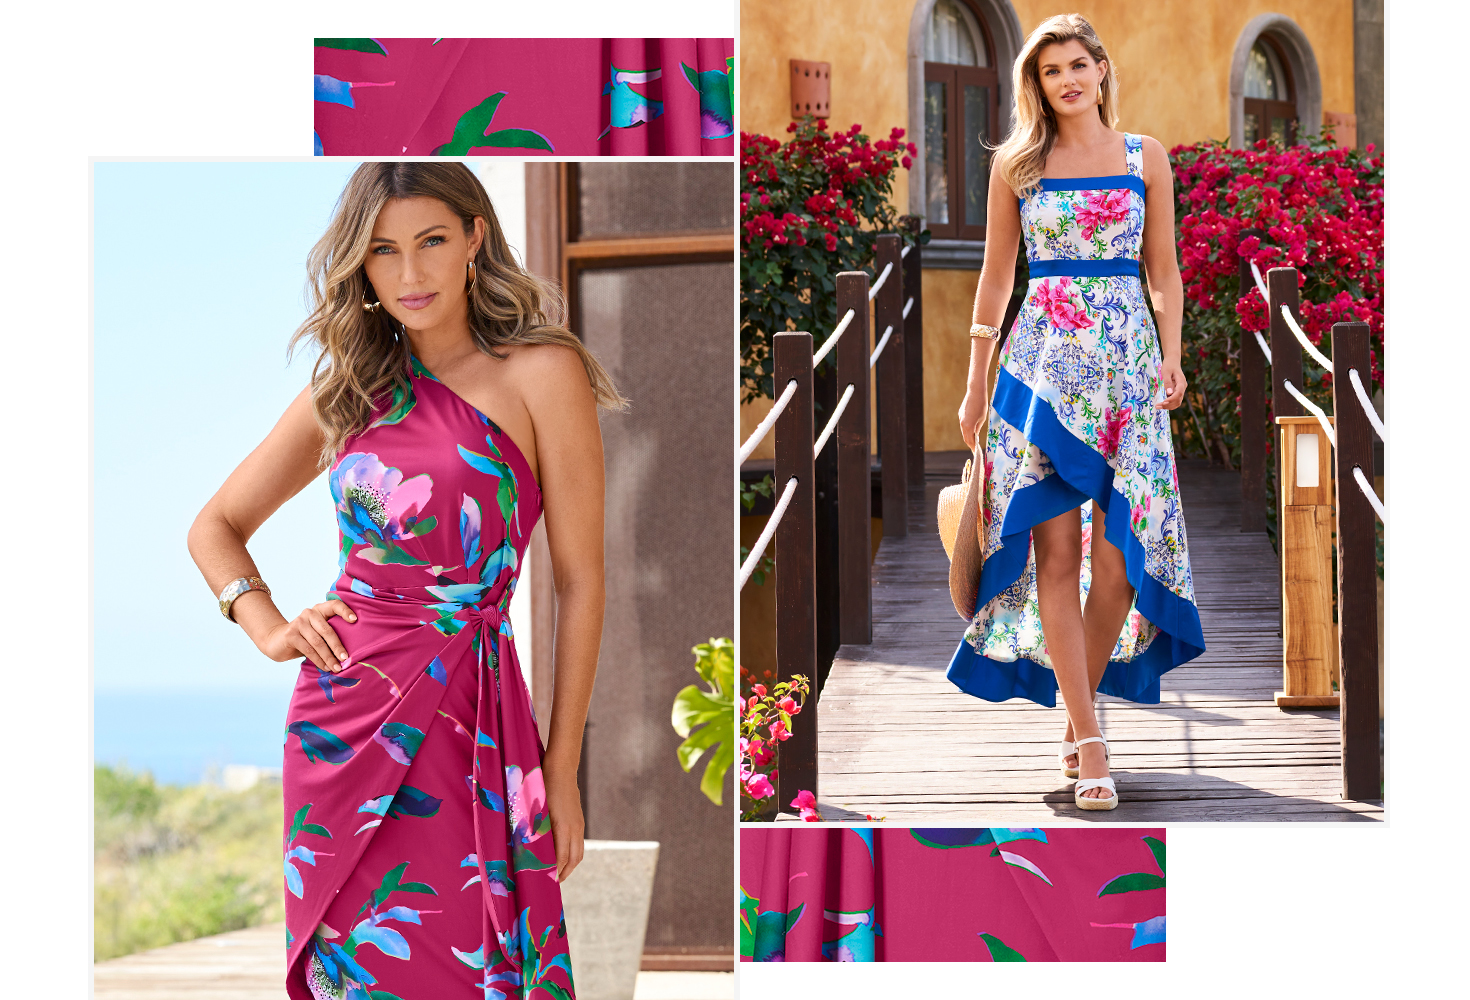 One models wearing a one shoulder pink and floral dress. The others wearing a hihg low dress with blue accents and a floral pattern.